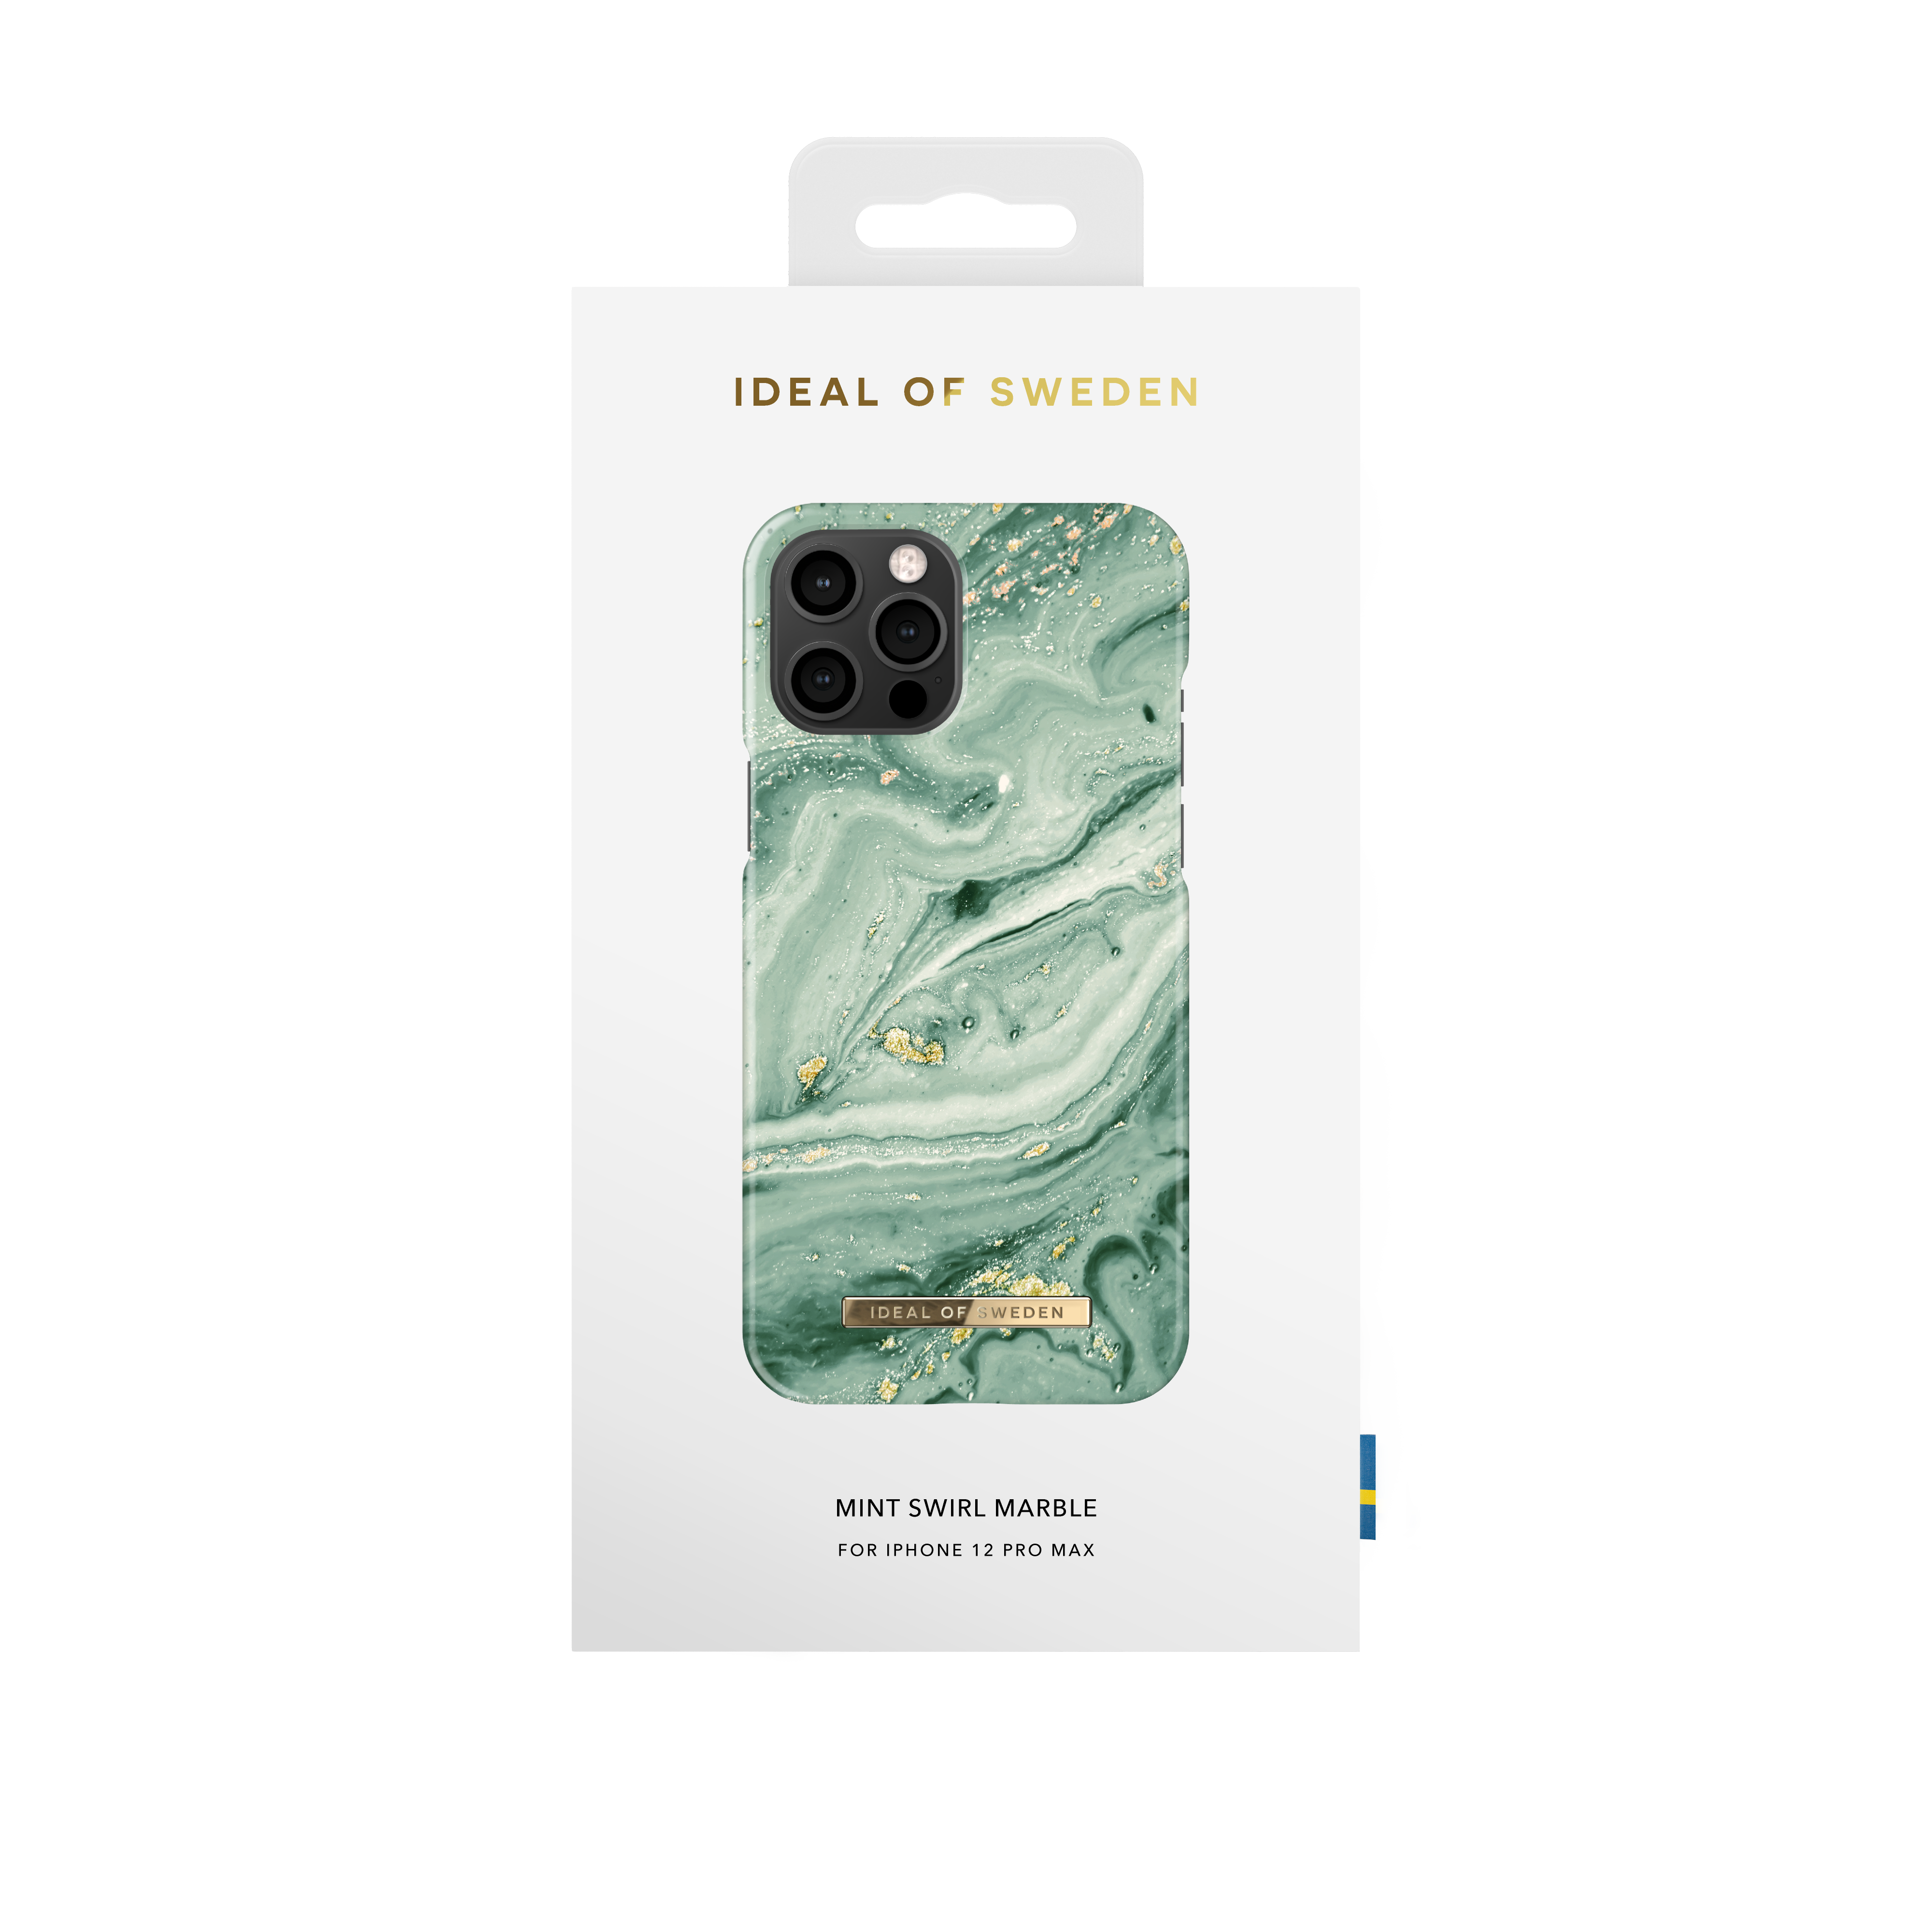 IPhone SWEDEN Max, Marble IDEAL Pro 12 IDFCSS21-I2067-258, Apple, Mint Backcover, Swirl OF